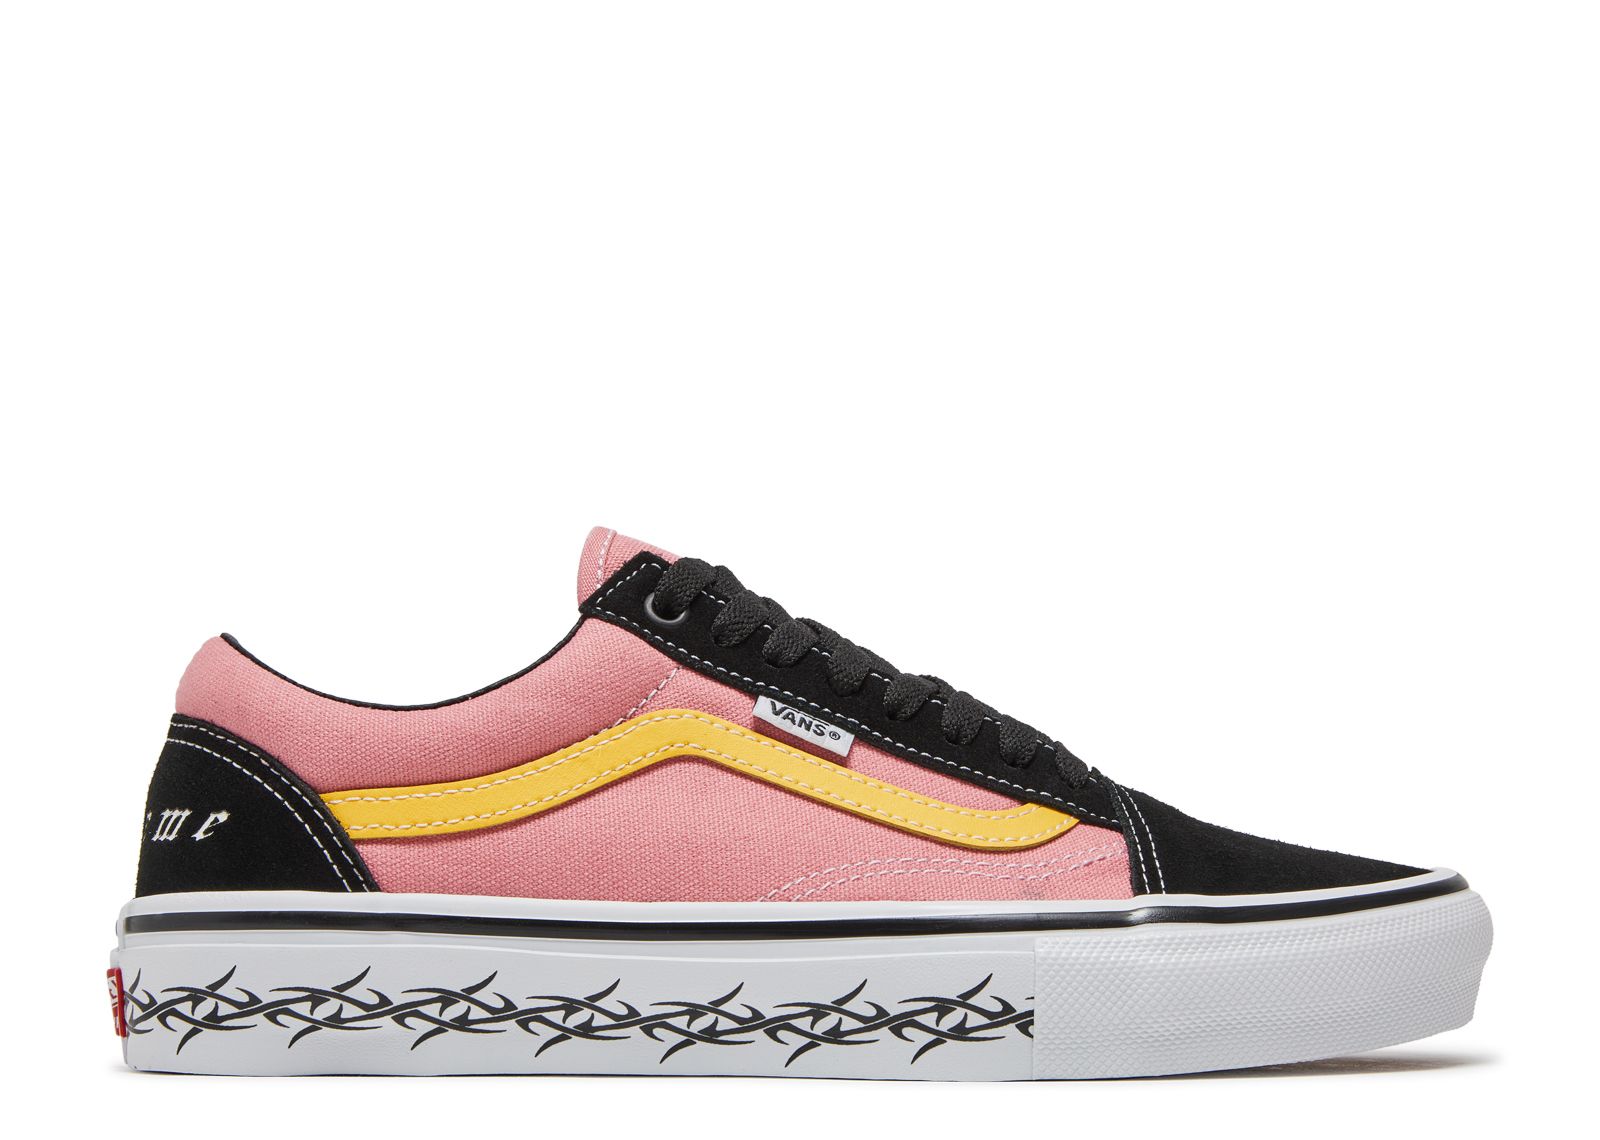 can not see Correlate Pearl Supreme X Old Skool 'Barbed Wire Pink' - Vans - VN0A5KRXB9P - pink/black |  Flight Club